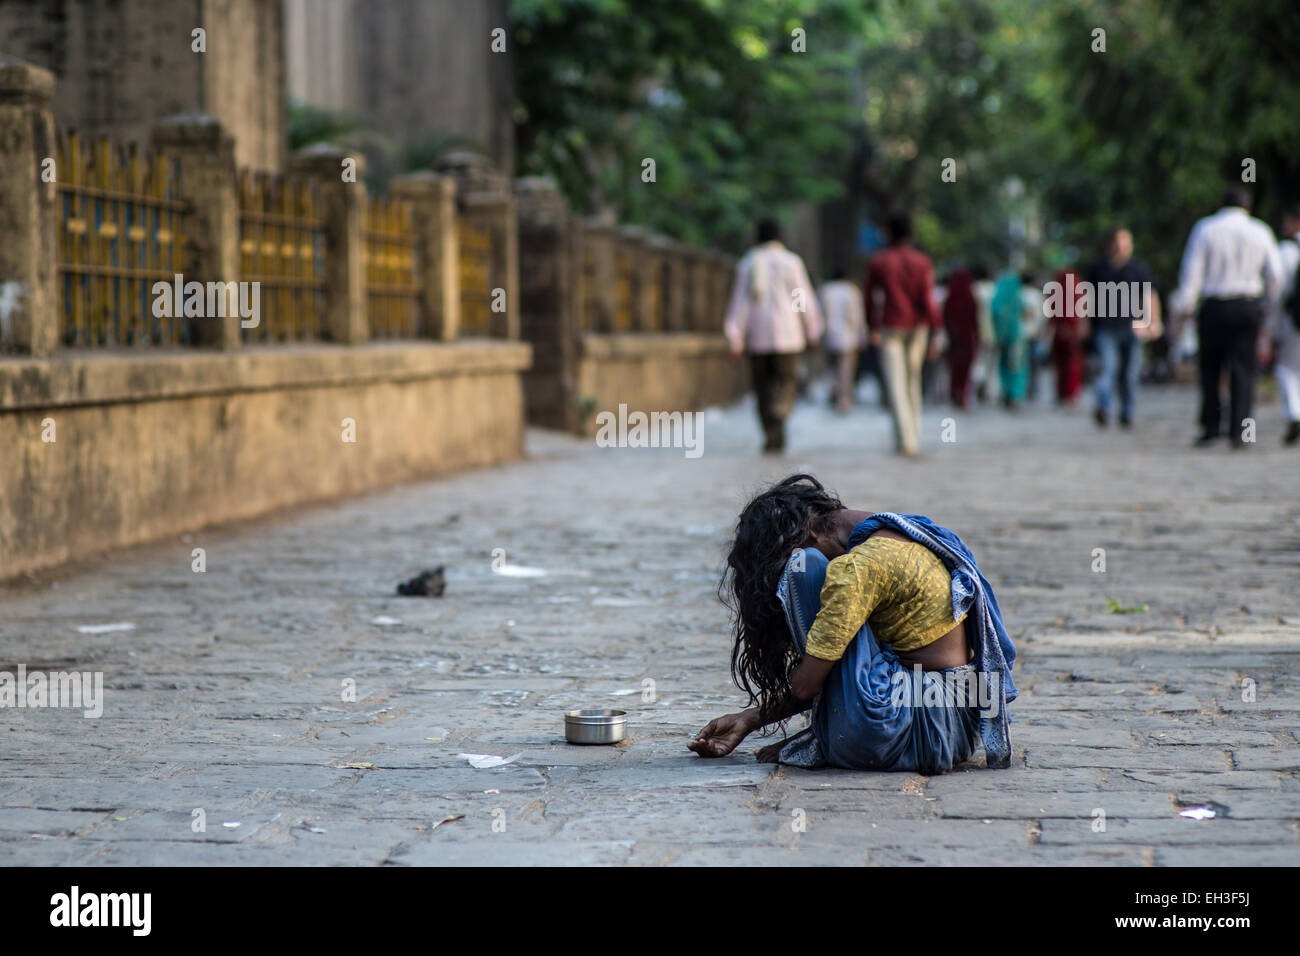 A young girl hiding her face while sitting and begging on the streets of Mumbai, India. Stock Photo